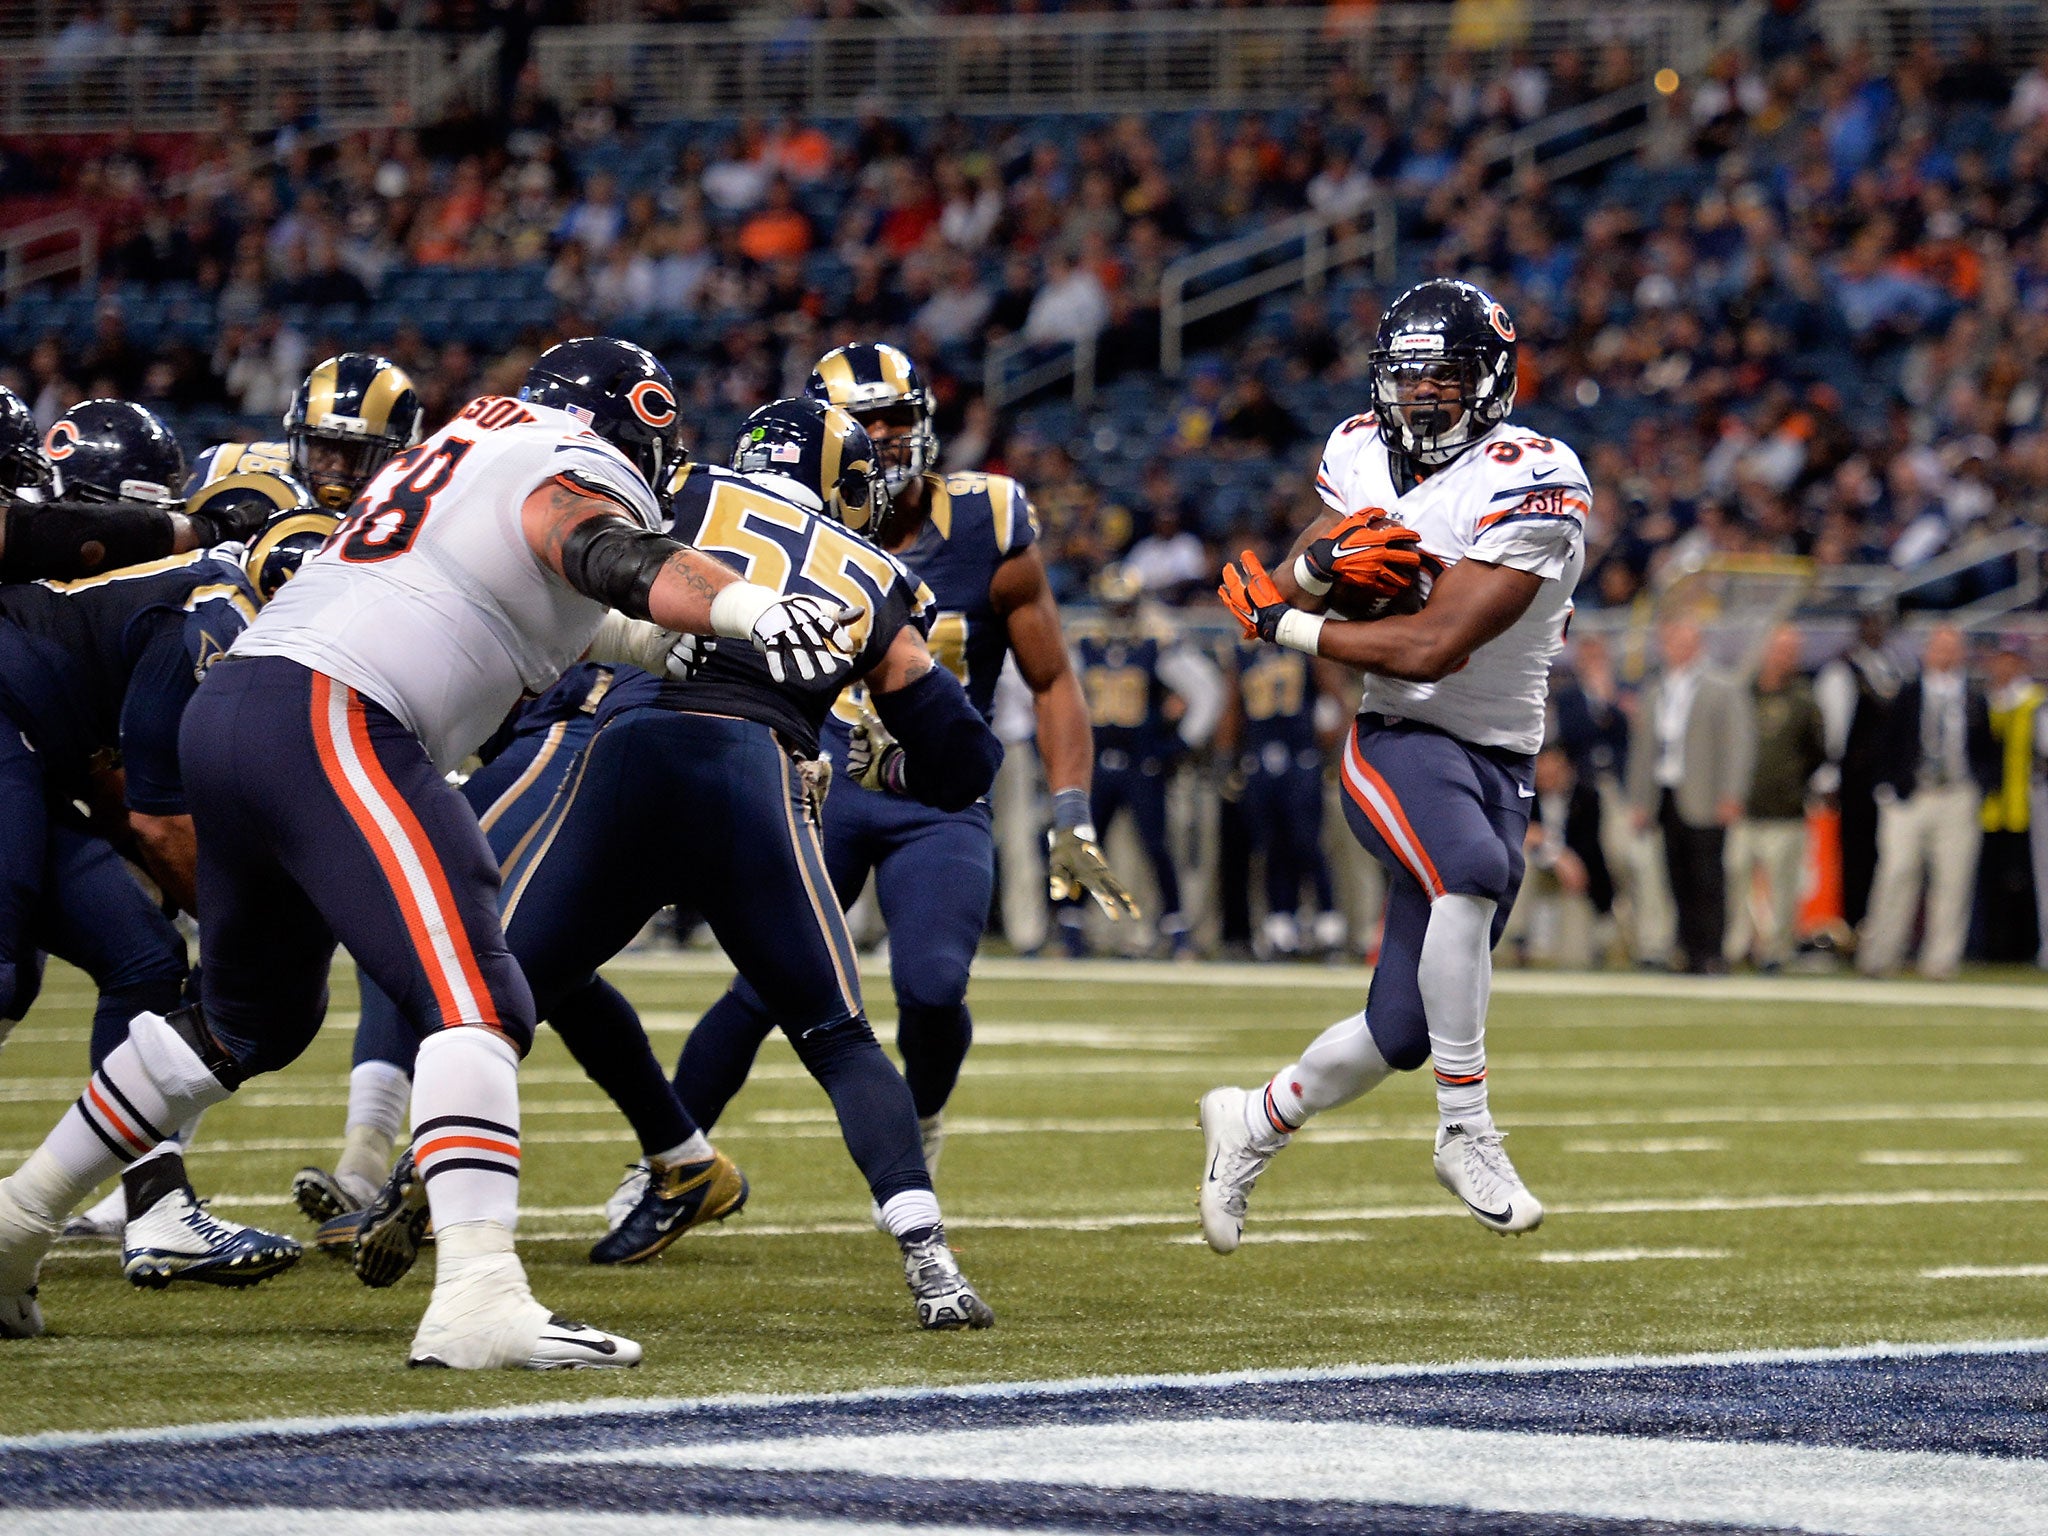 Jeremy Langford scored two touchdowns as the Chicago Bears beat the New Orleans Saints